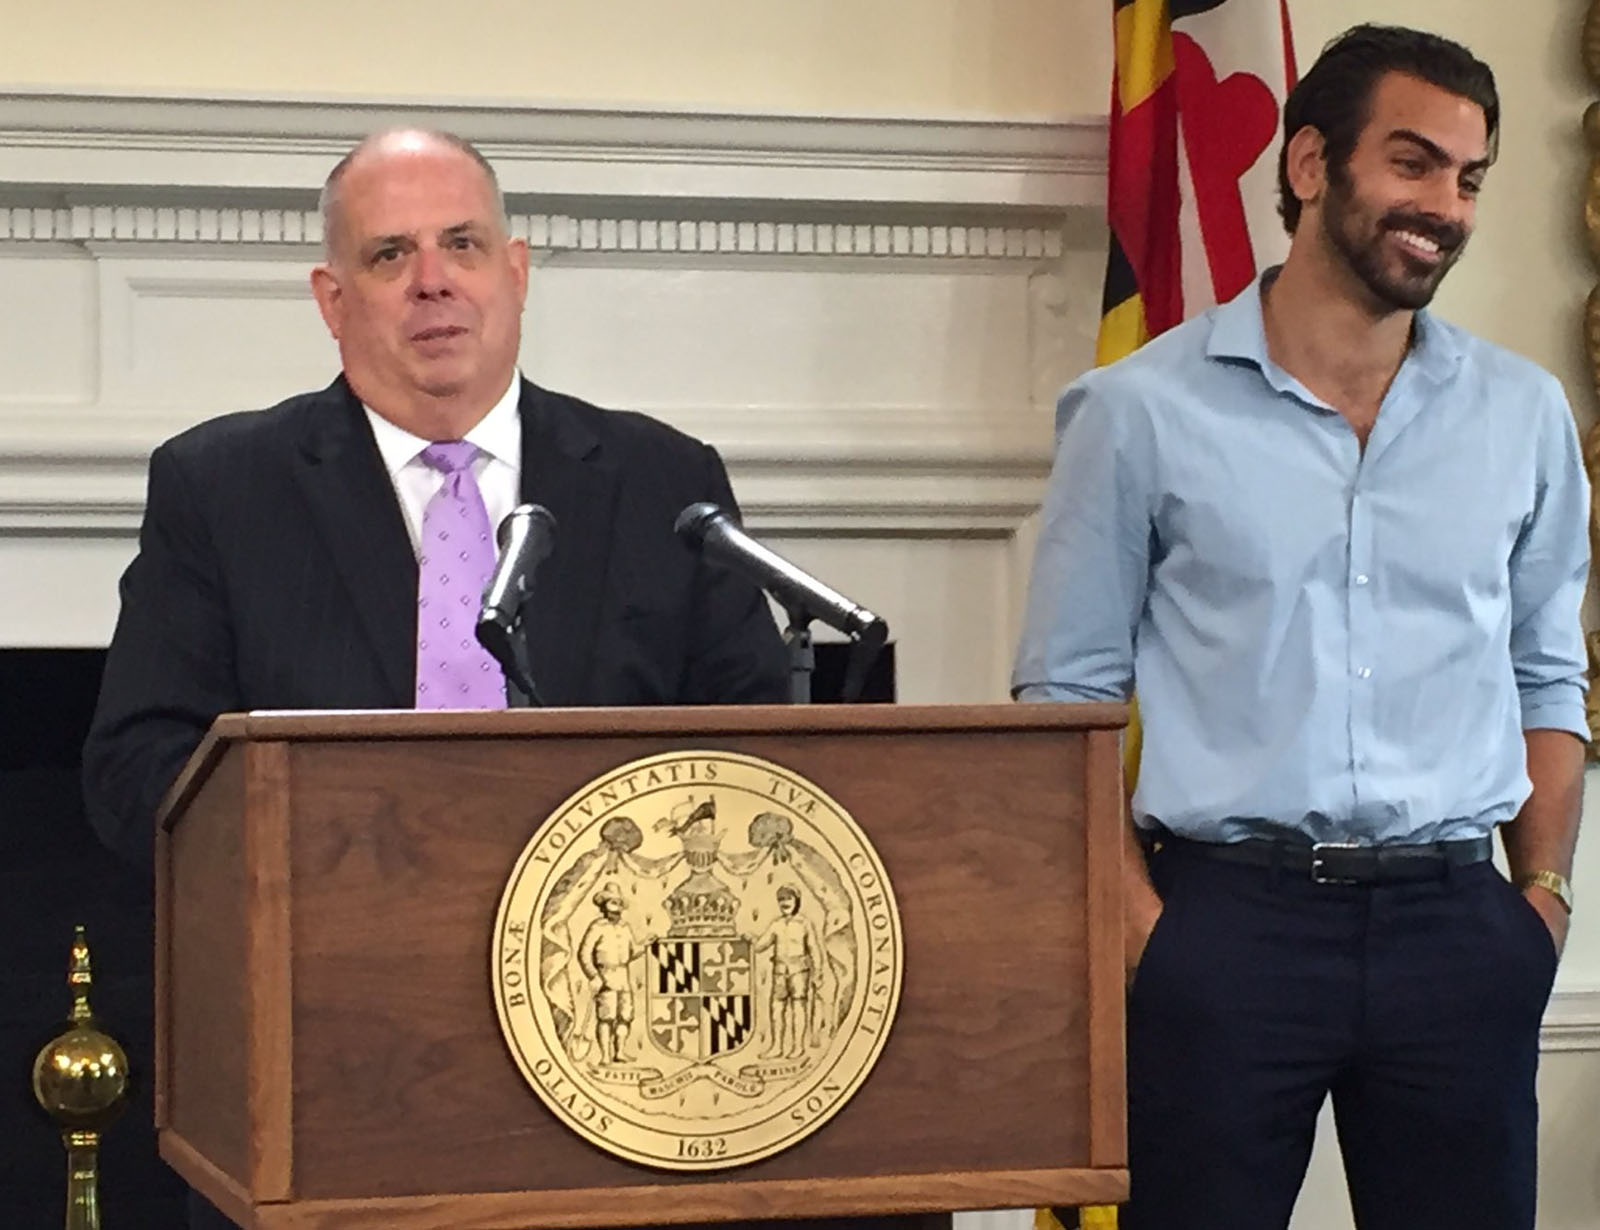 "There's absolutely no chance of me going on 'Dancing With the Stars.' I'm very proud to have a Marylander who's already won, and I think we ought to just leave it at that," Maryland Gov. Larry Hogan said Wednesday after honoring the reality TV star with a Governor's Citation. (WTOP/Michelle Basch)